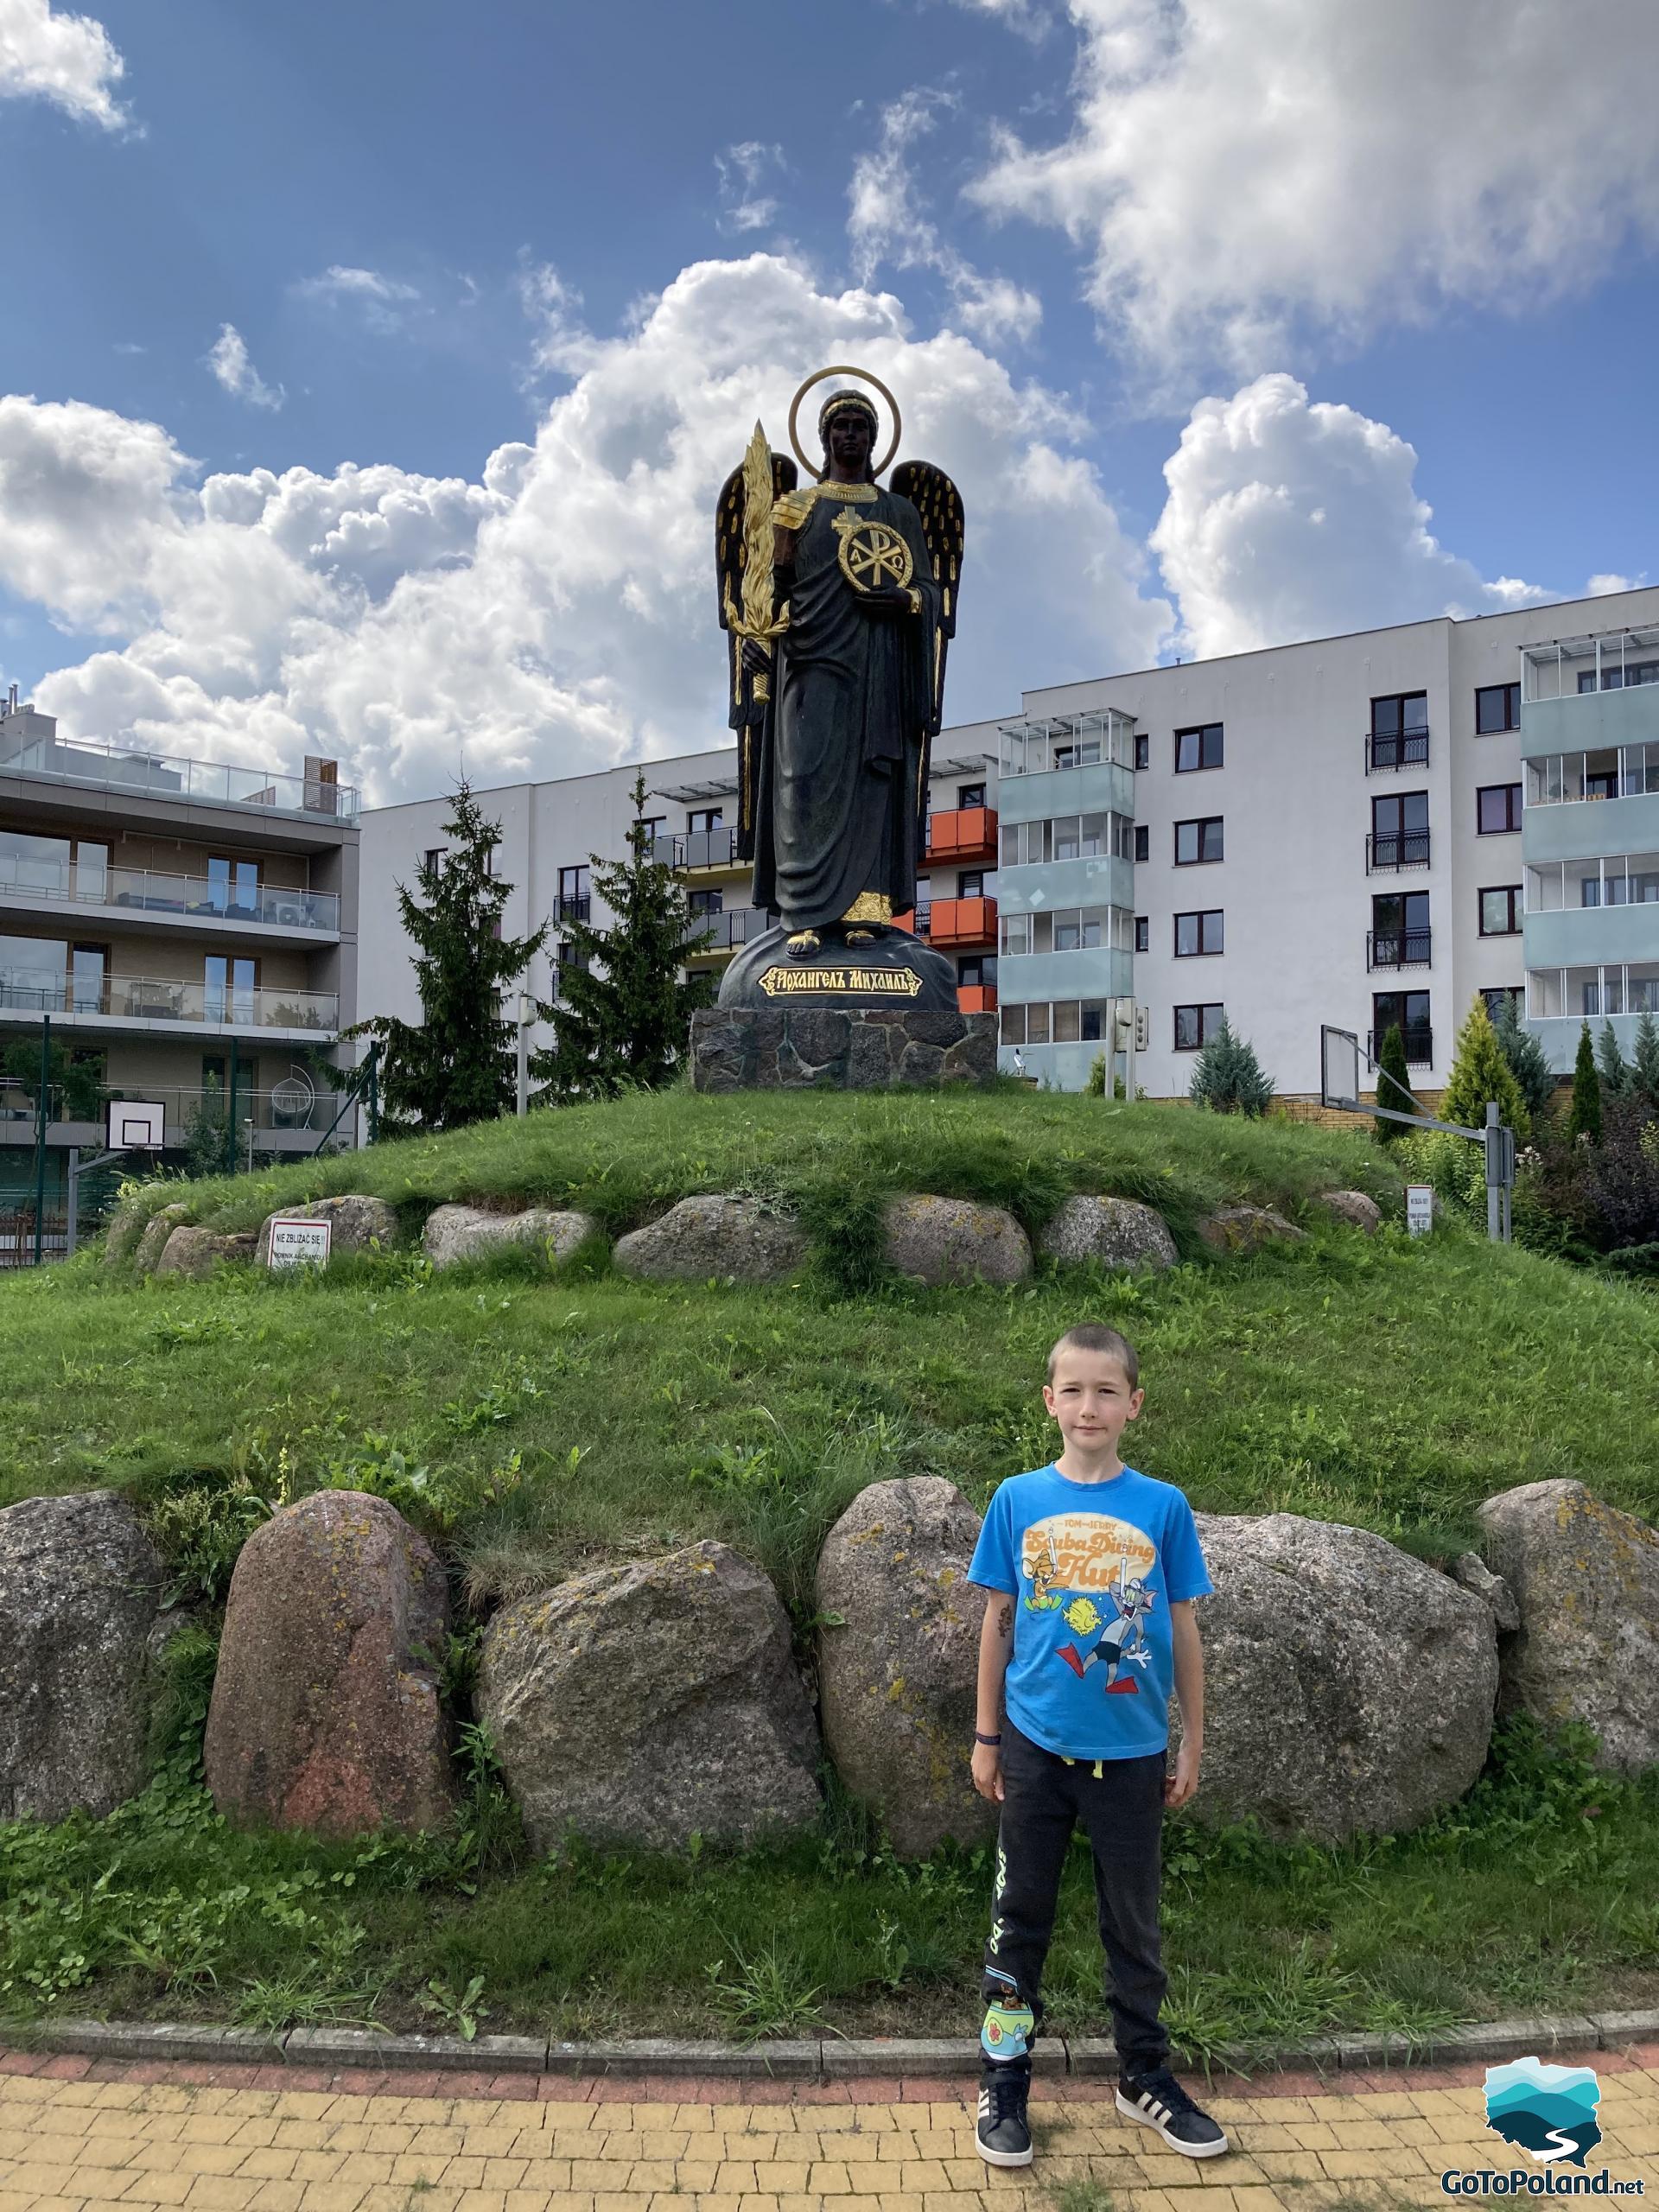 a boy is standing in front of a statue of an angel with wings